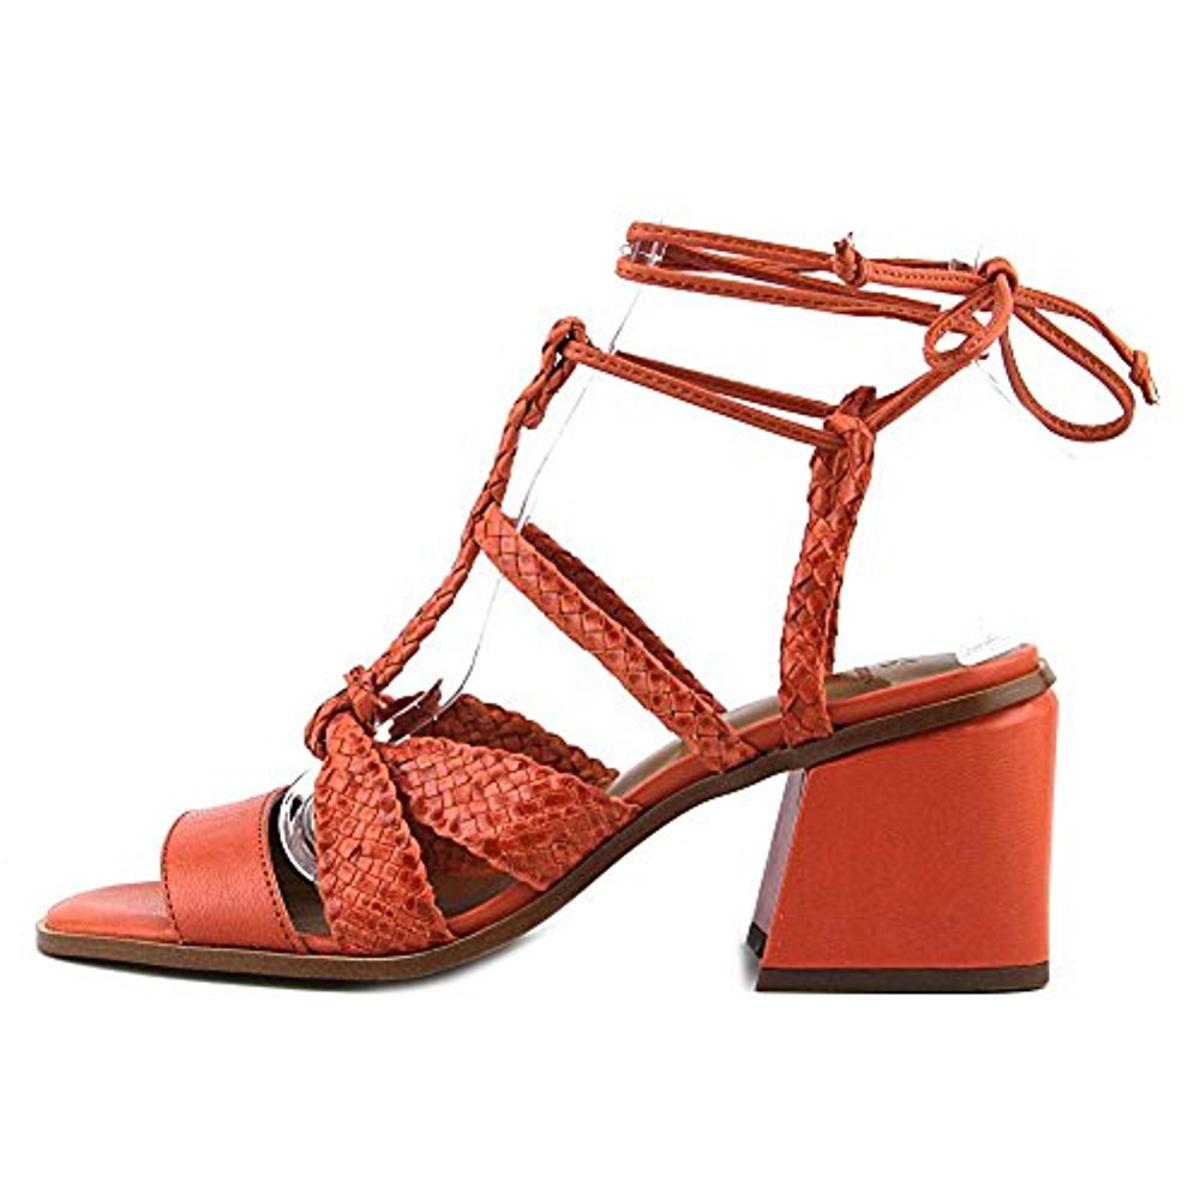 H Halston Womens Piper Open Toe Strappy Sandals Heels Shoes BHFO 3048 ...